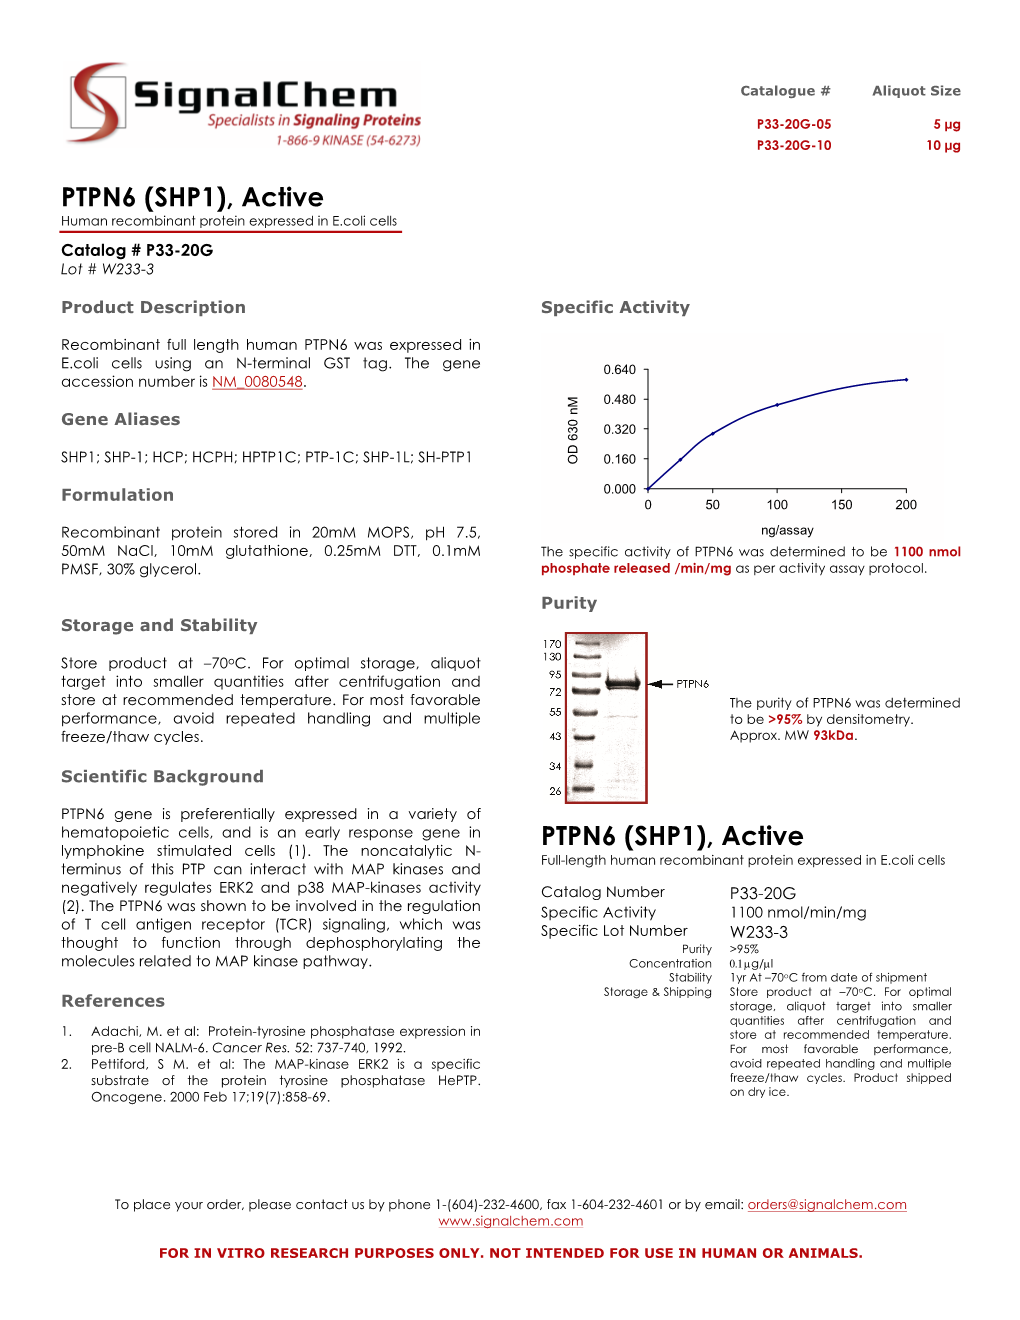 PTPN6 (SHP1), Active Human Recombinant Protein Expressed in E.Coli Cells